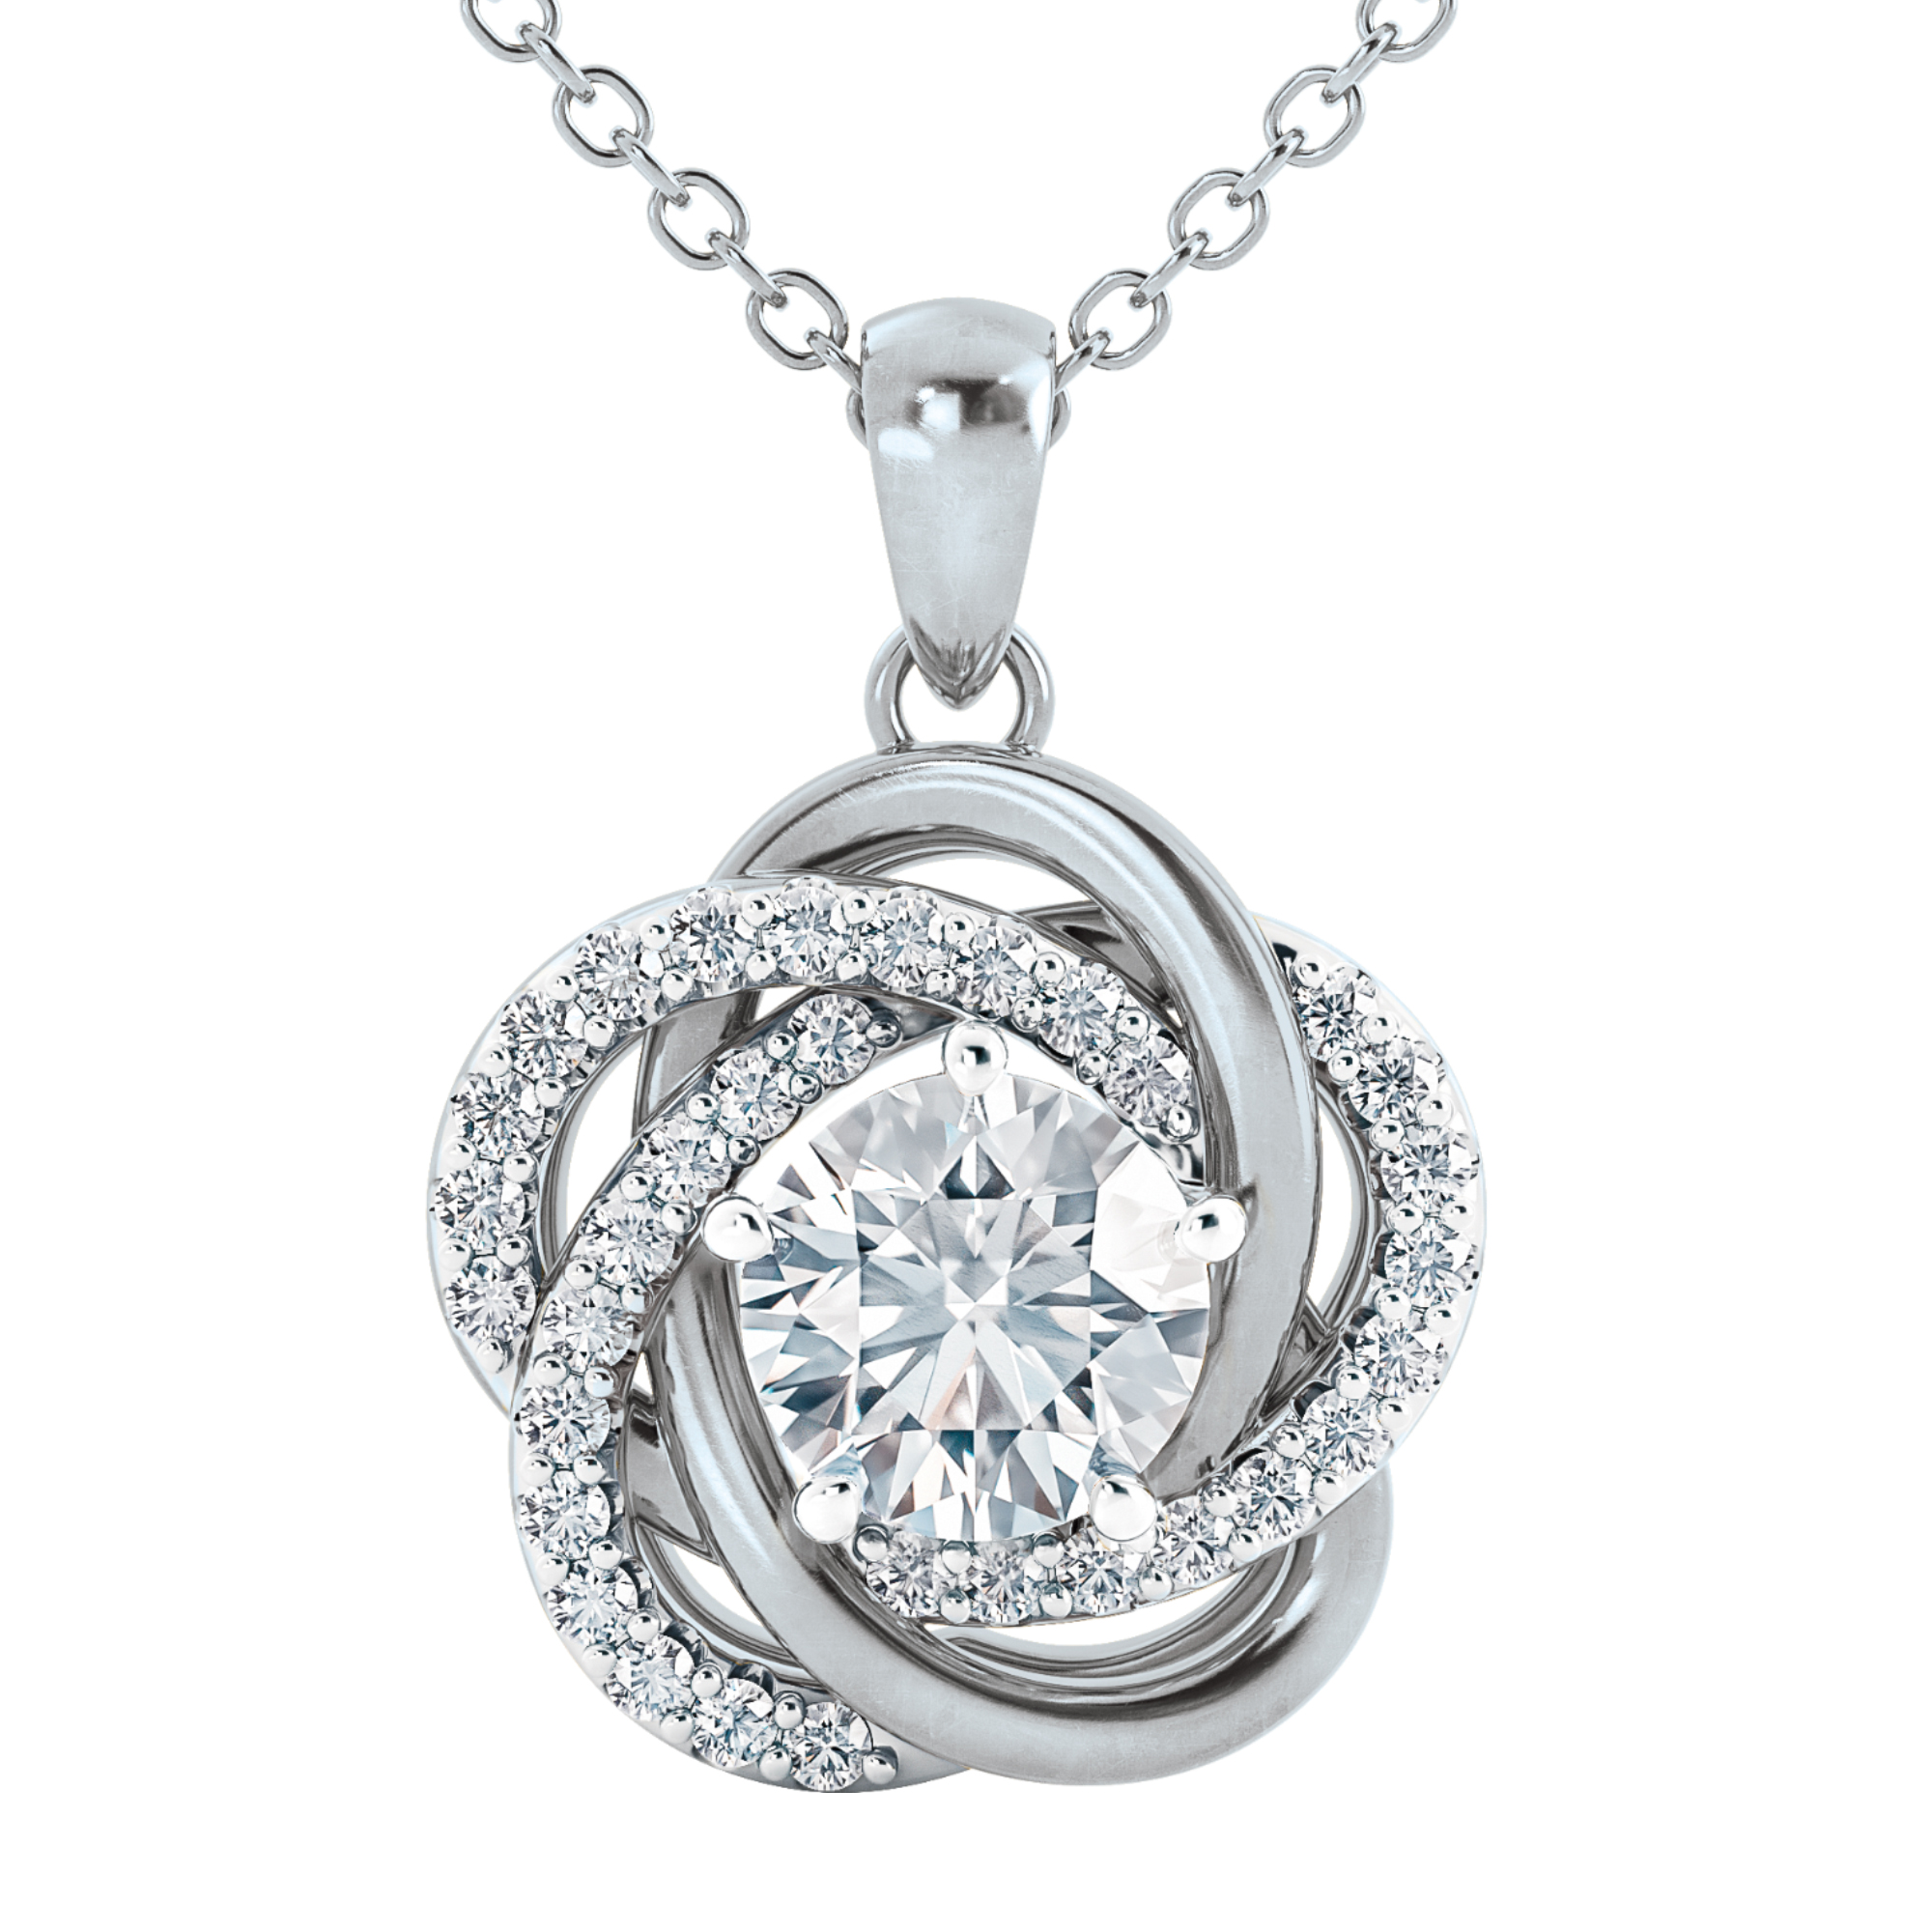 Perfectly Paired Love Knot Pendant with FREE Matching Earrings 10917 0019 a main